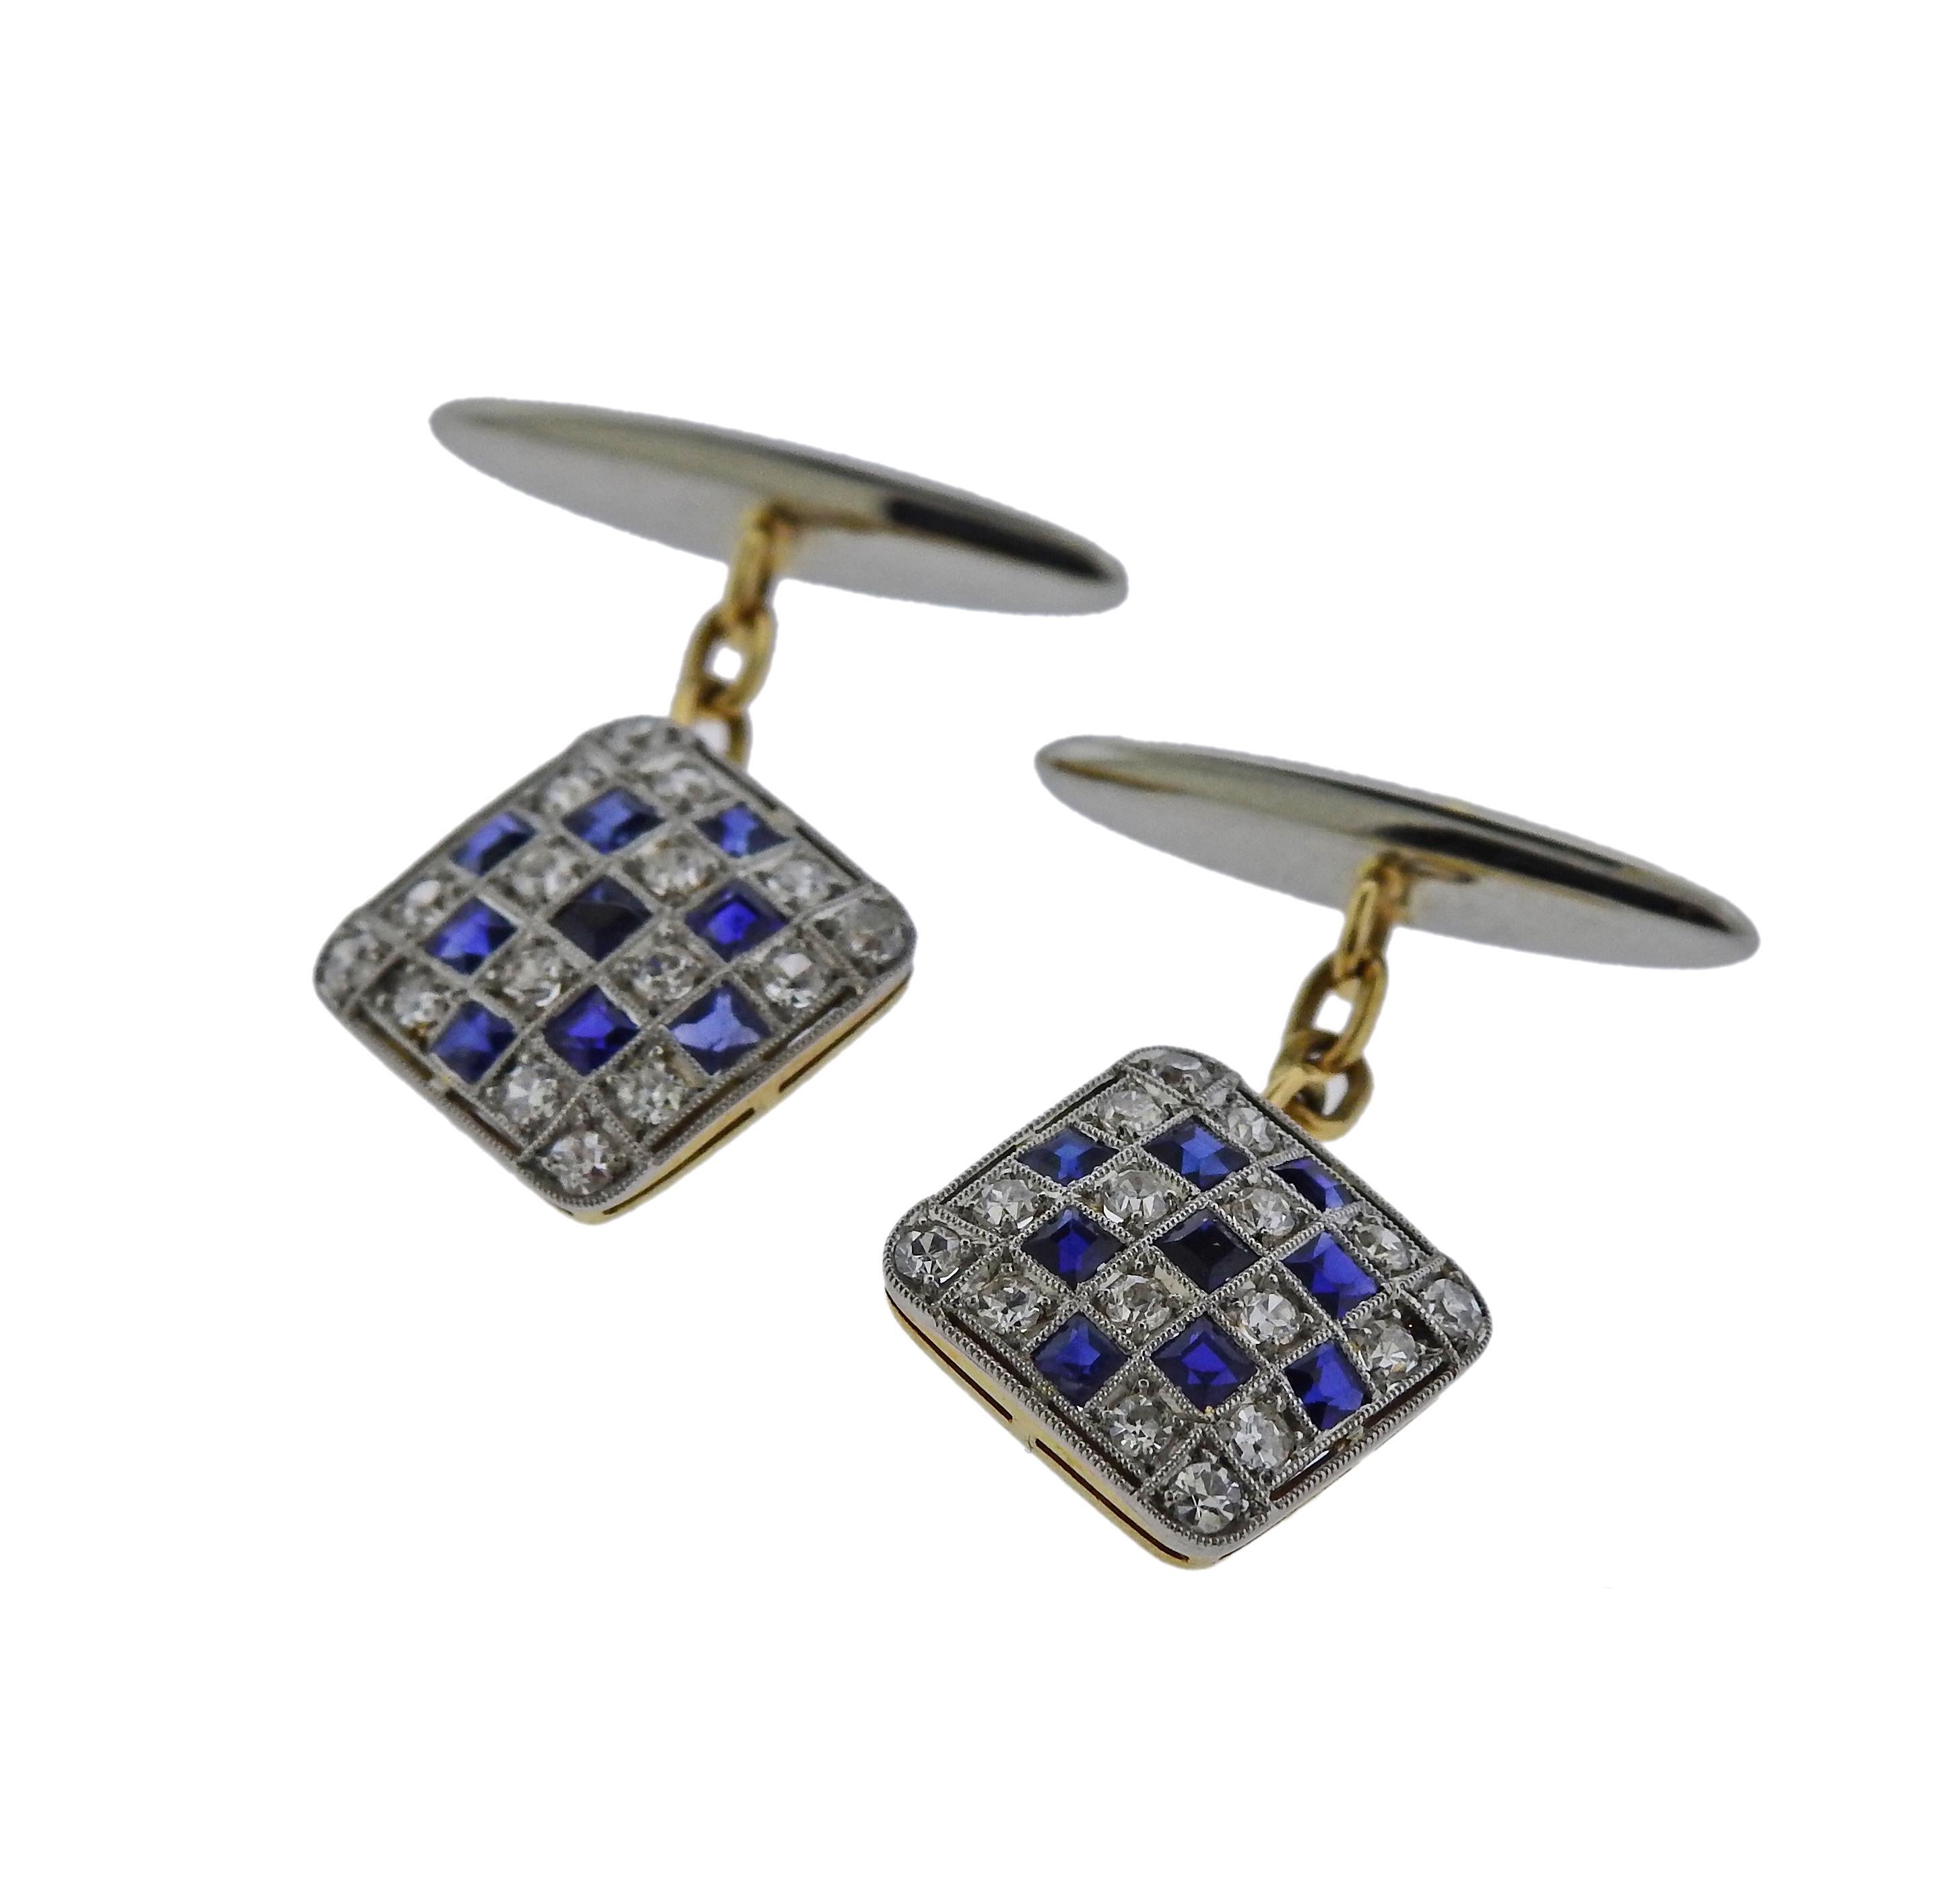 Pair of Art Deco, circa 1920s 18k white and yellow gold cufflinks, set with sapphires and approx. 0.32ctw in old mine cut diamonds, featuring checkered pattern. Cufflink top is 12mm x 12mm and weigh 5.4 grams. Tested 18k. 